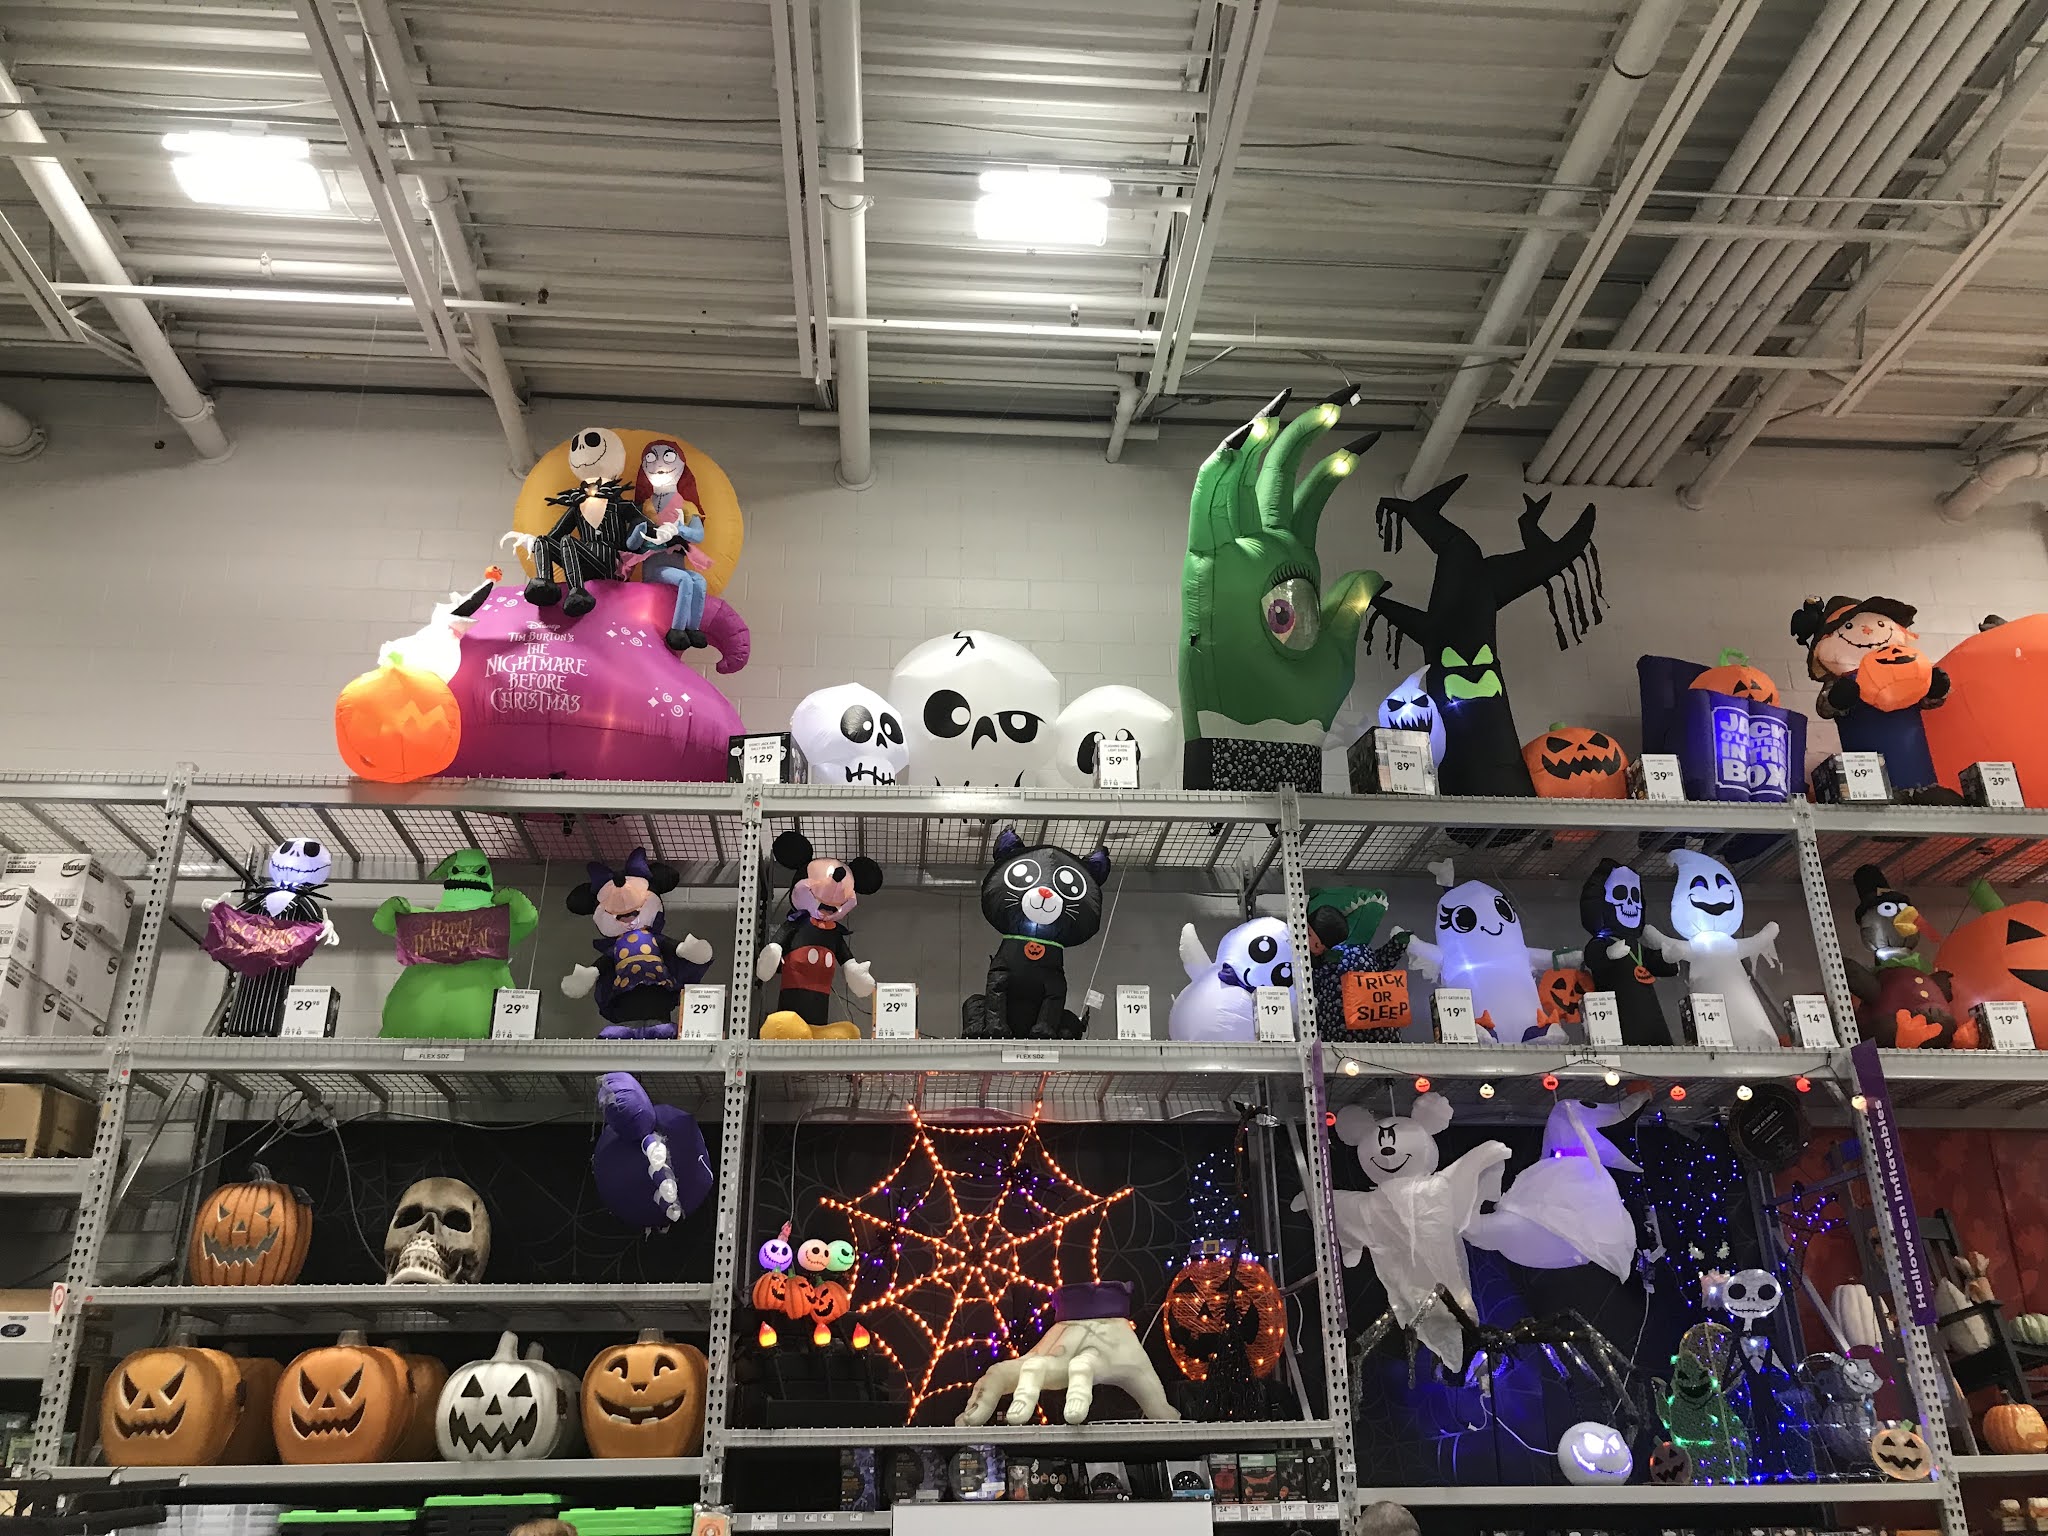 COME WITH ME TO HOMEGOODS DISNEY FINDS HOME DECOR SHOP WITH ME 2021 